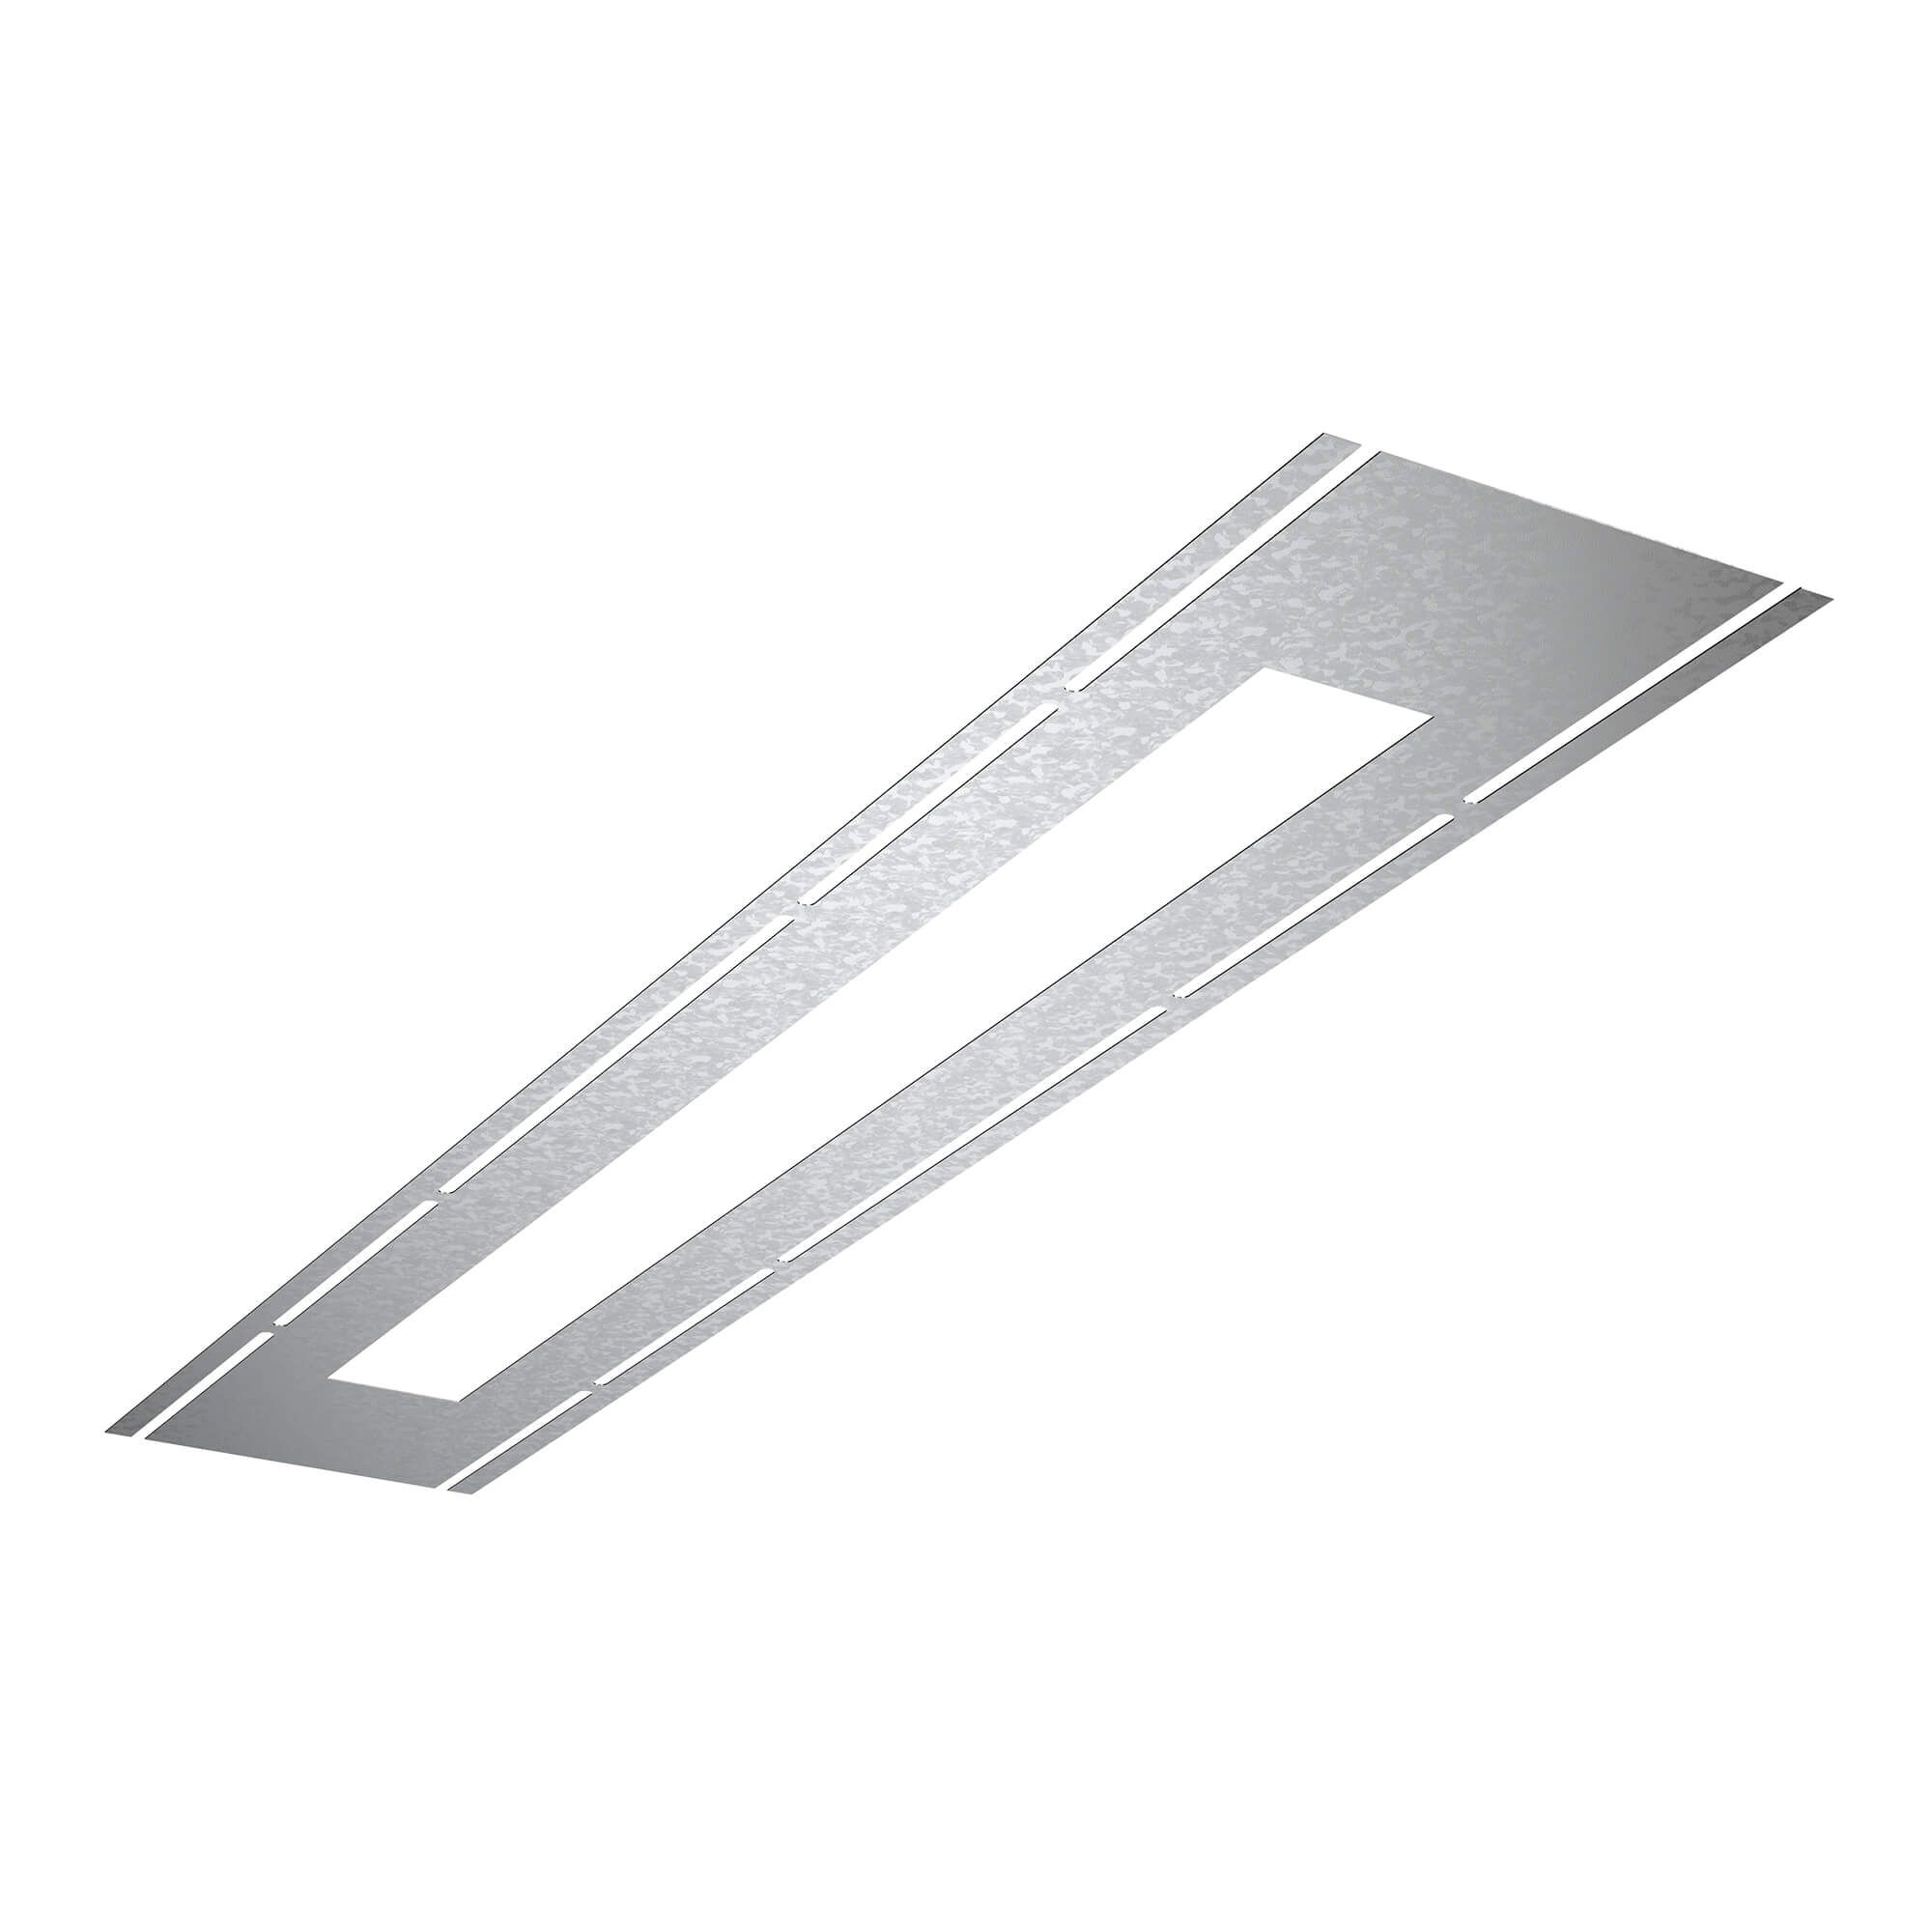 RFP Universal Rough-In Plate for Linear Recessed